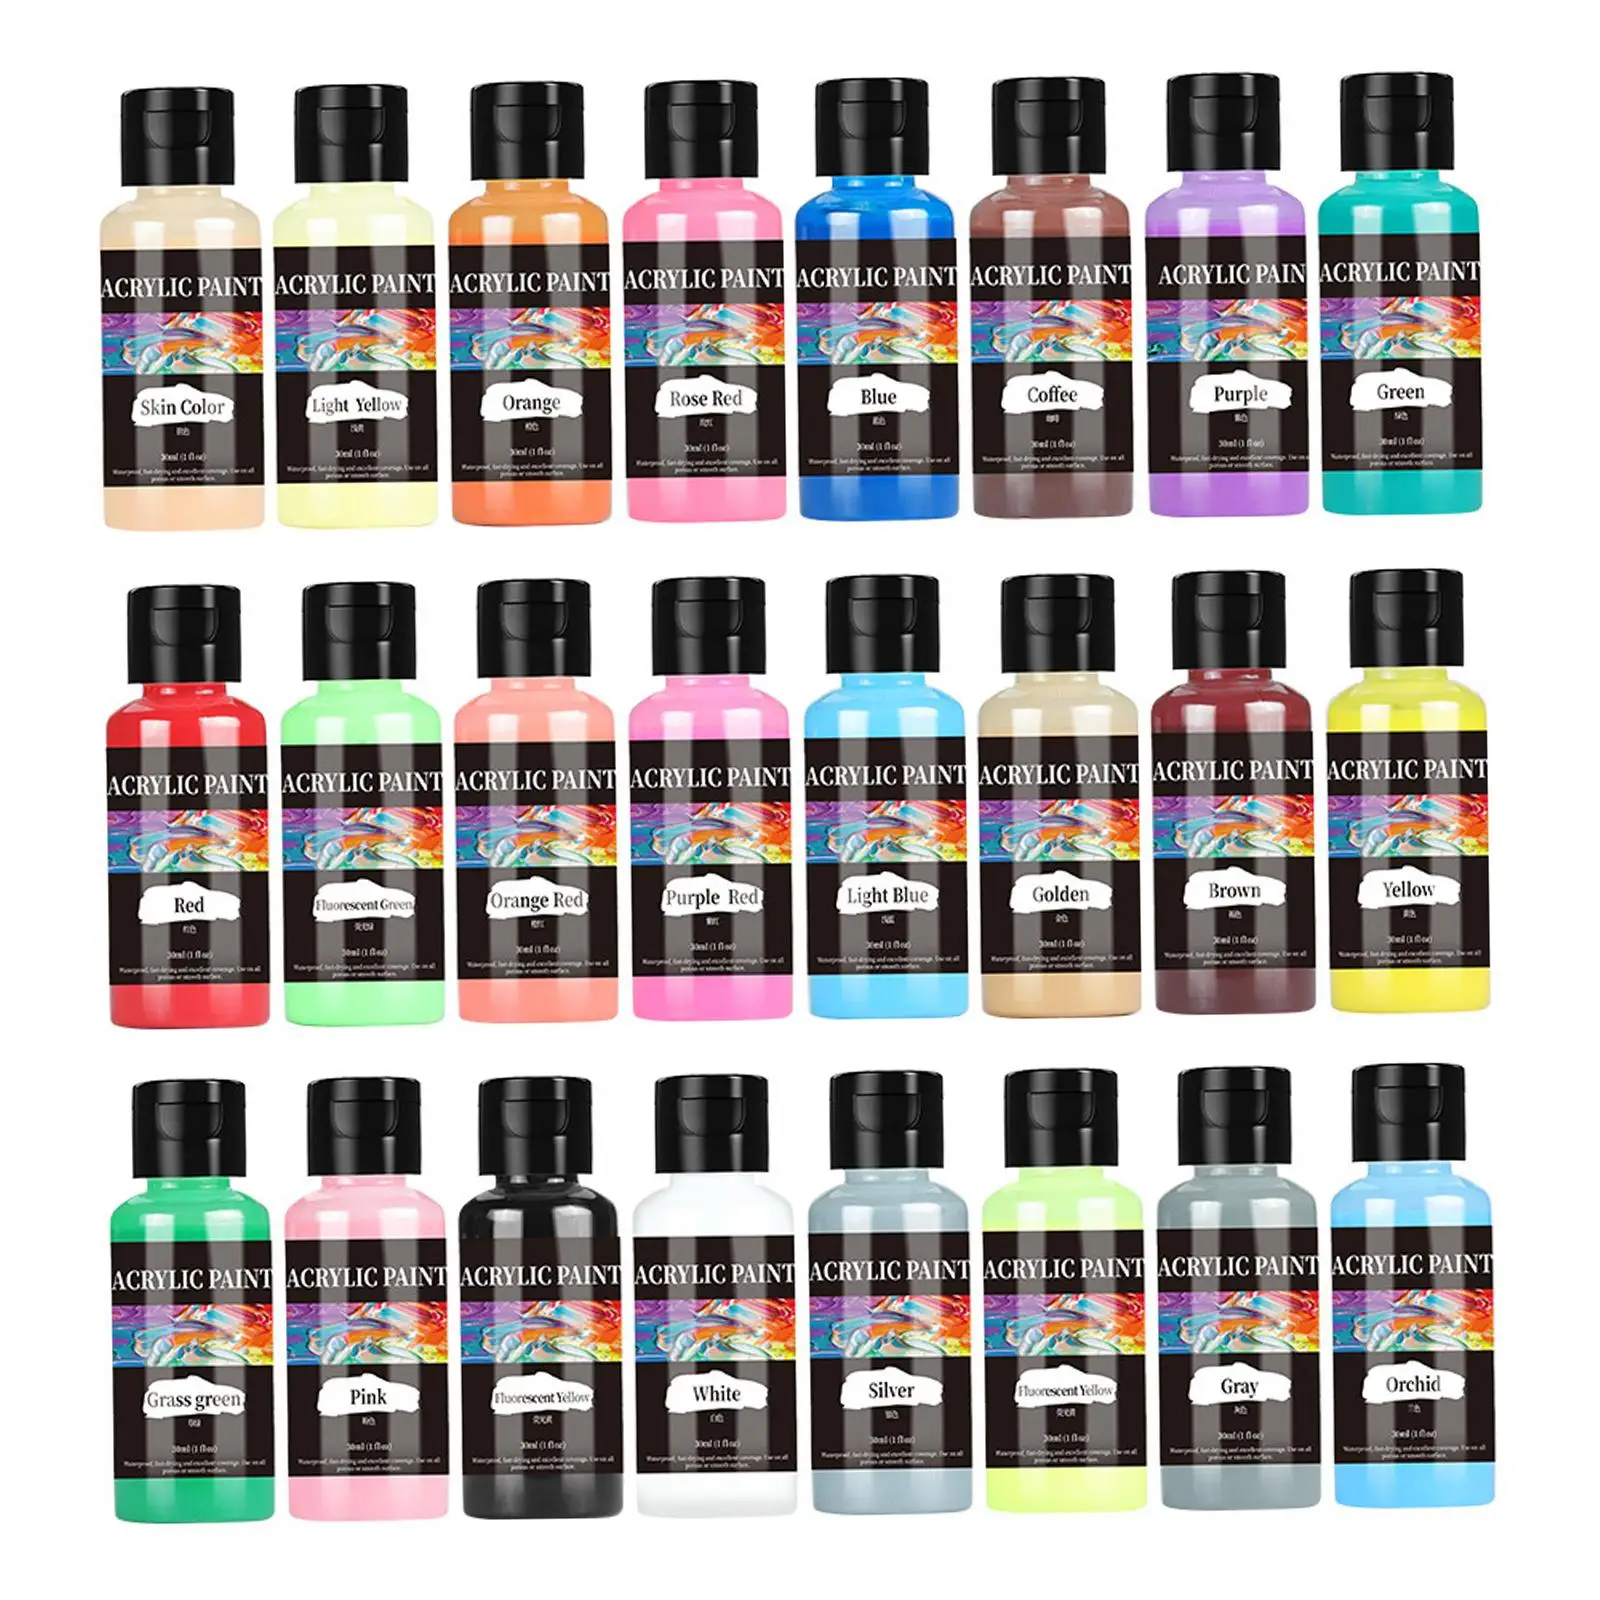 24x Acrylic Leather Paint Set DIY Art Craft Project Professional Acrylic Leather Dye Fit Paper Beginner Shoes Car Seat Sneakers